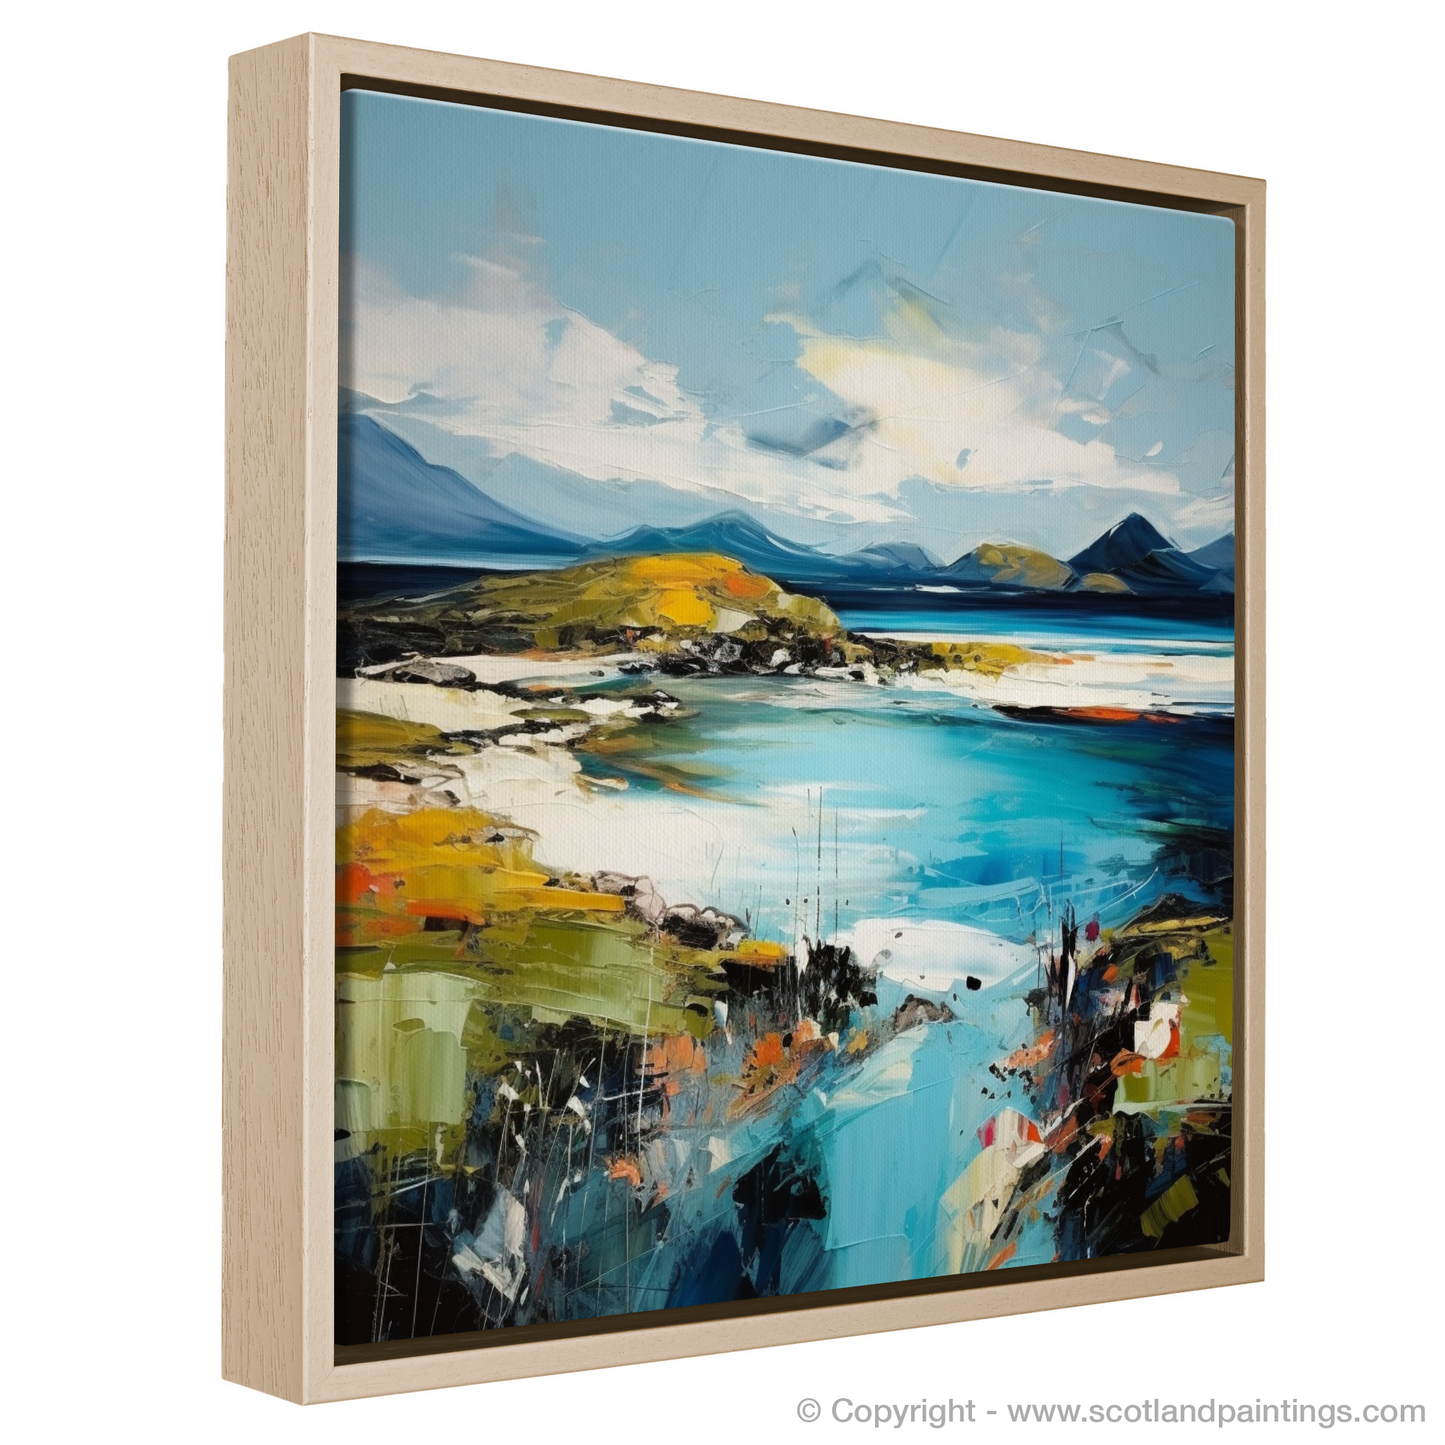 Painting and Art Print of Isle of Barra, Outer Hebrides entitled "Isle of Barra: An Expressionist Ode to Rugged Beauty".